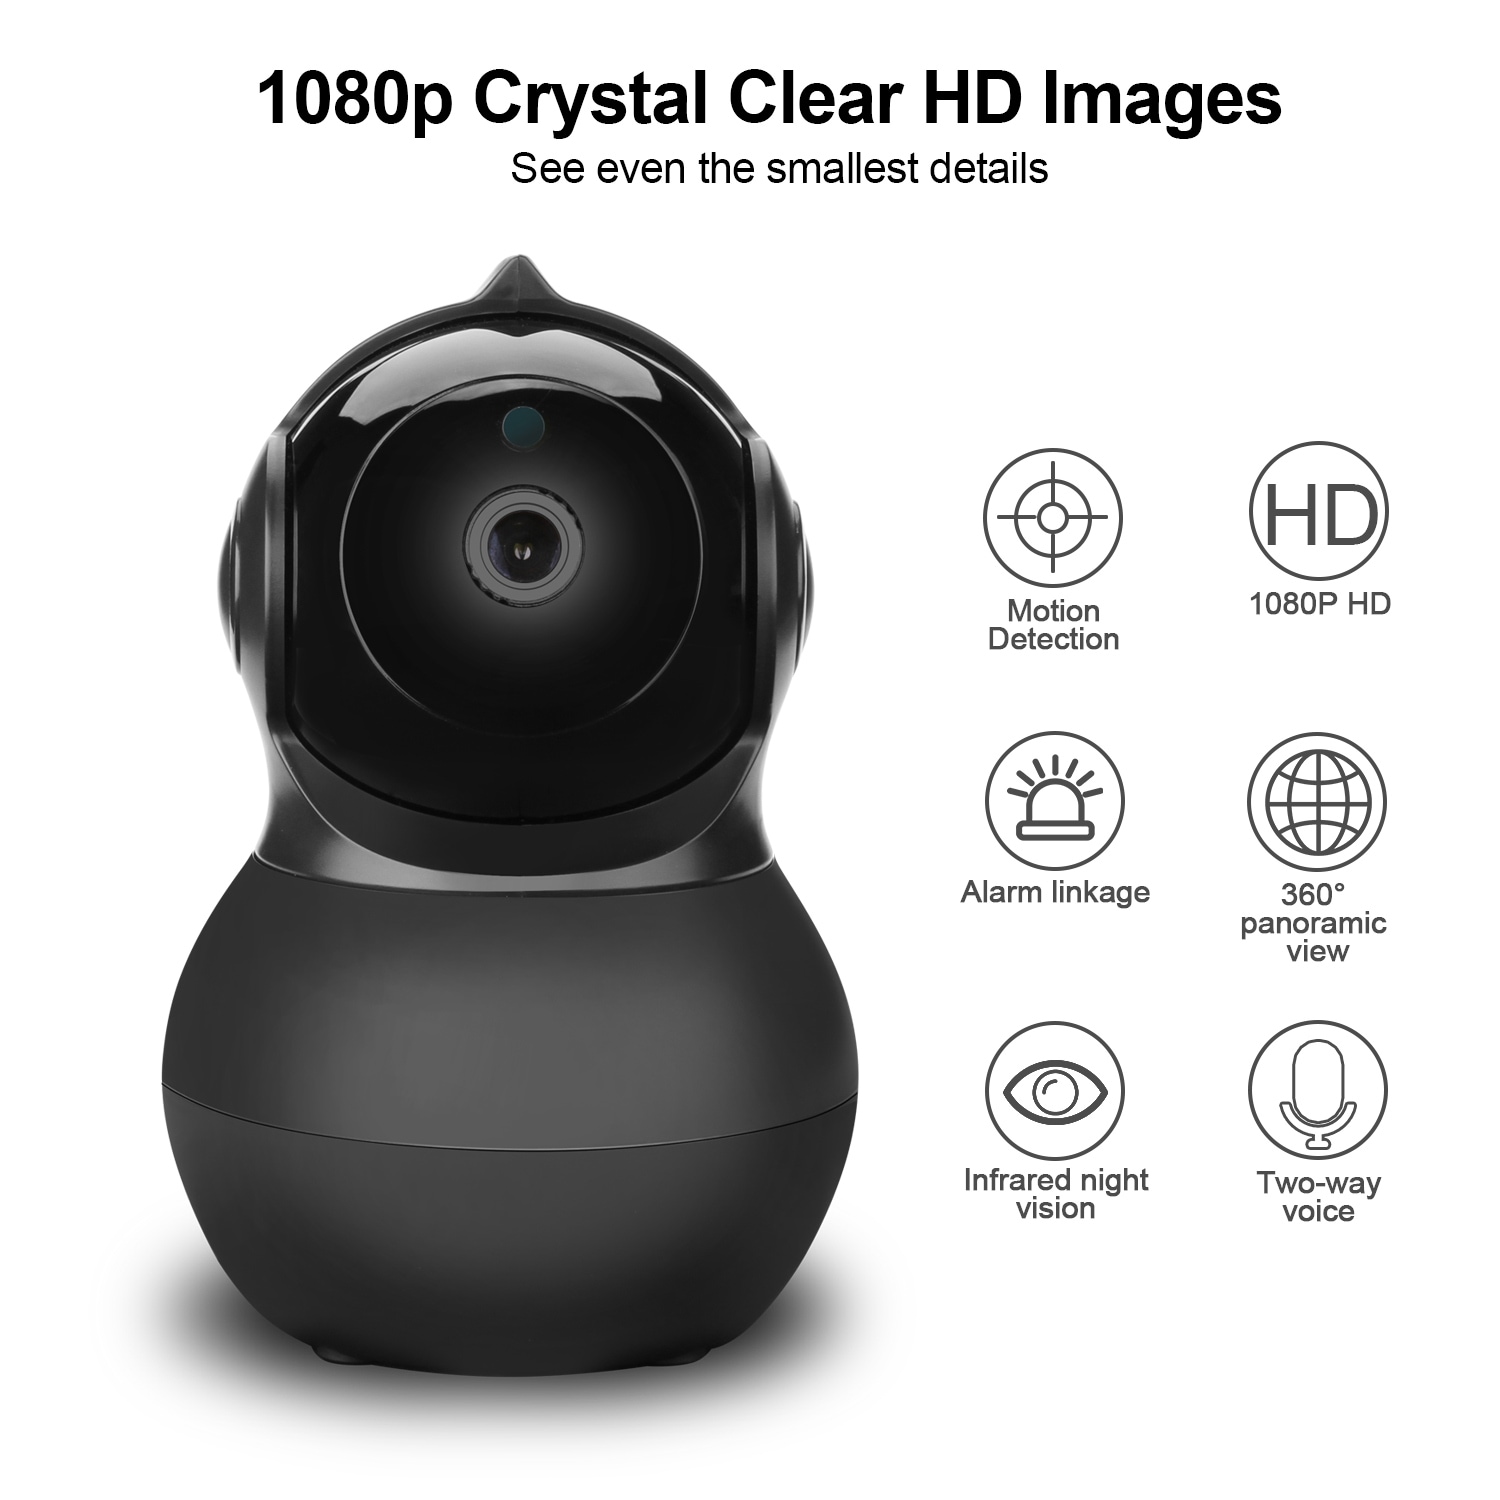 baby monitor 360 view